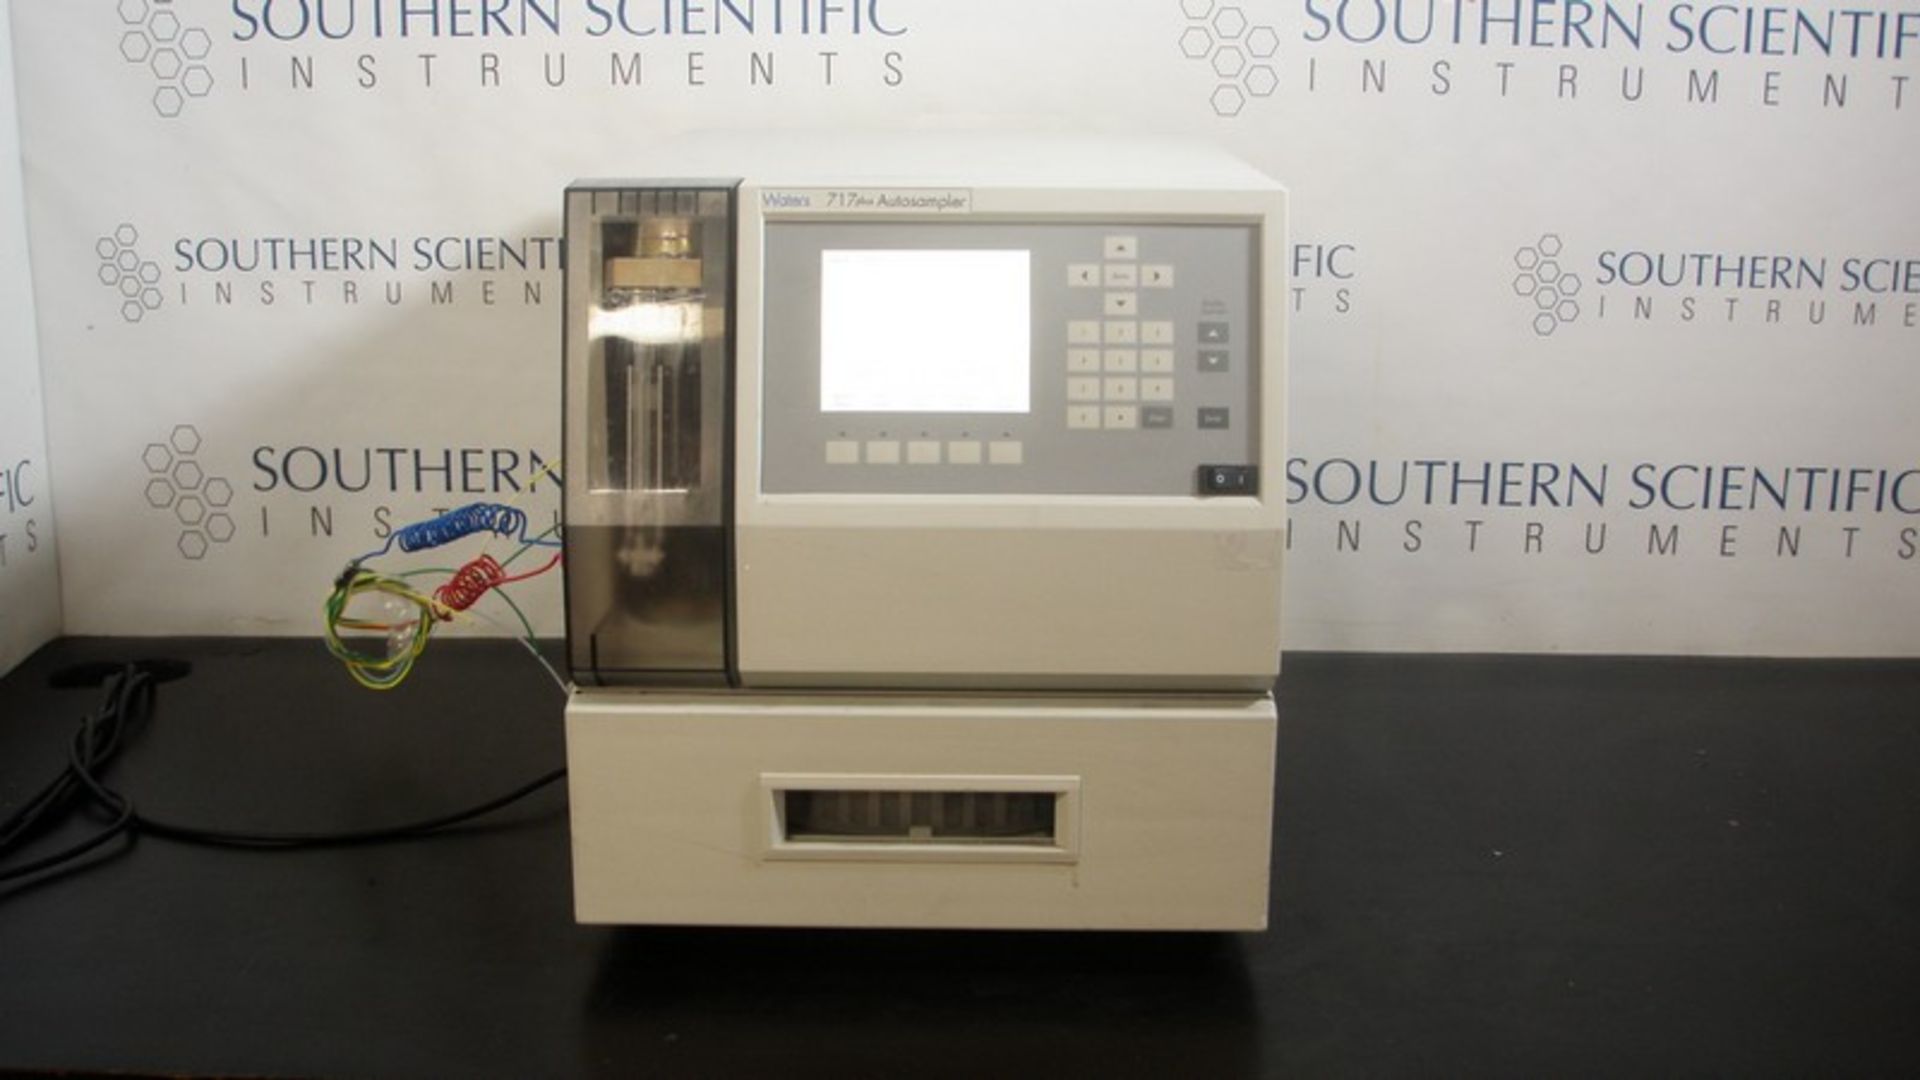 Waters 717 Plus Autosampler, Model WAT078900, S/N E9771P 387M (NOTE: Unit Powers On, LCD is Clear,